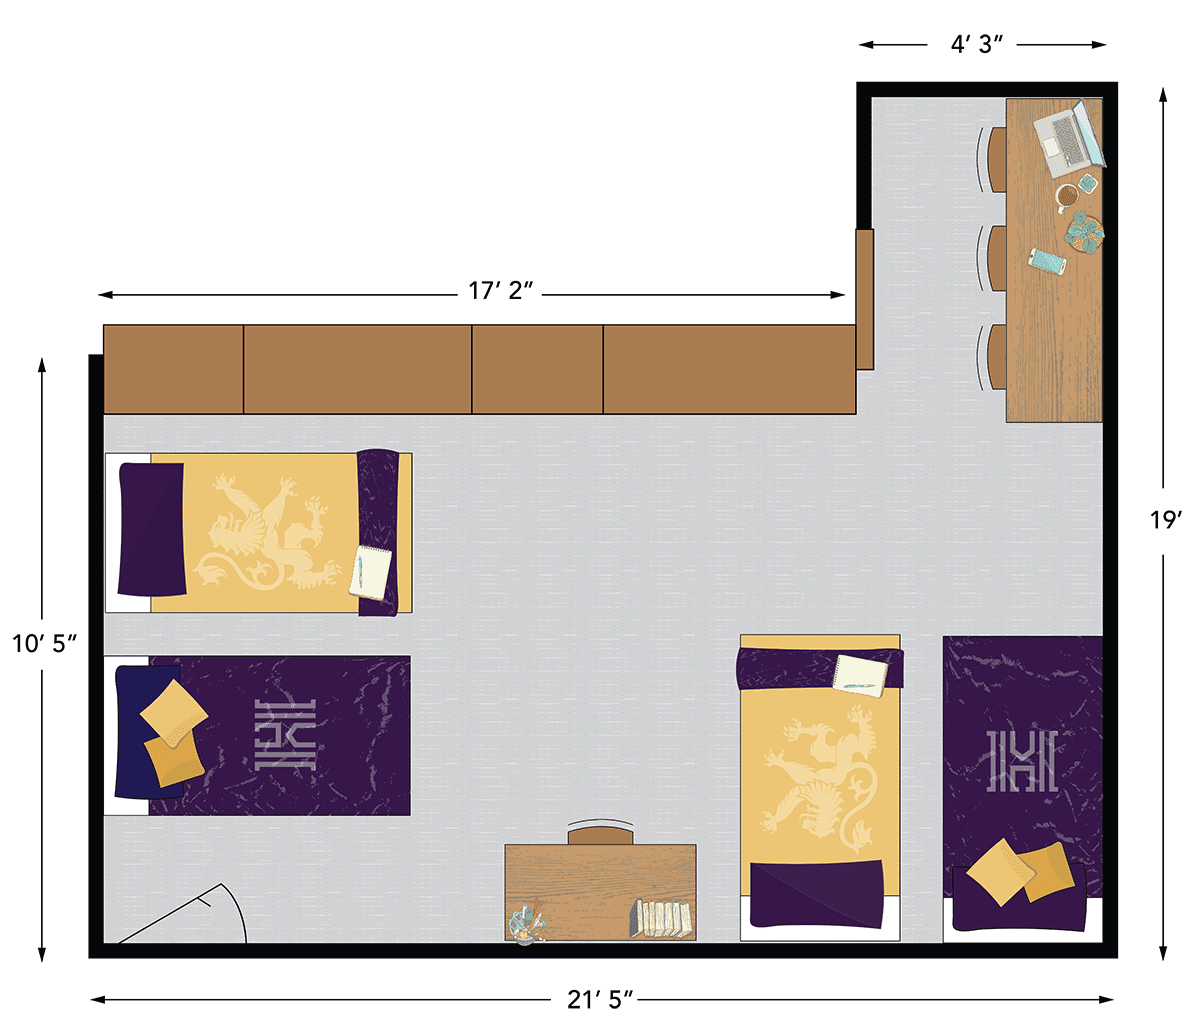 Diagram of a quad room in Gillette Hall at Houghton University.